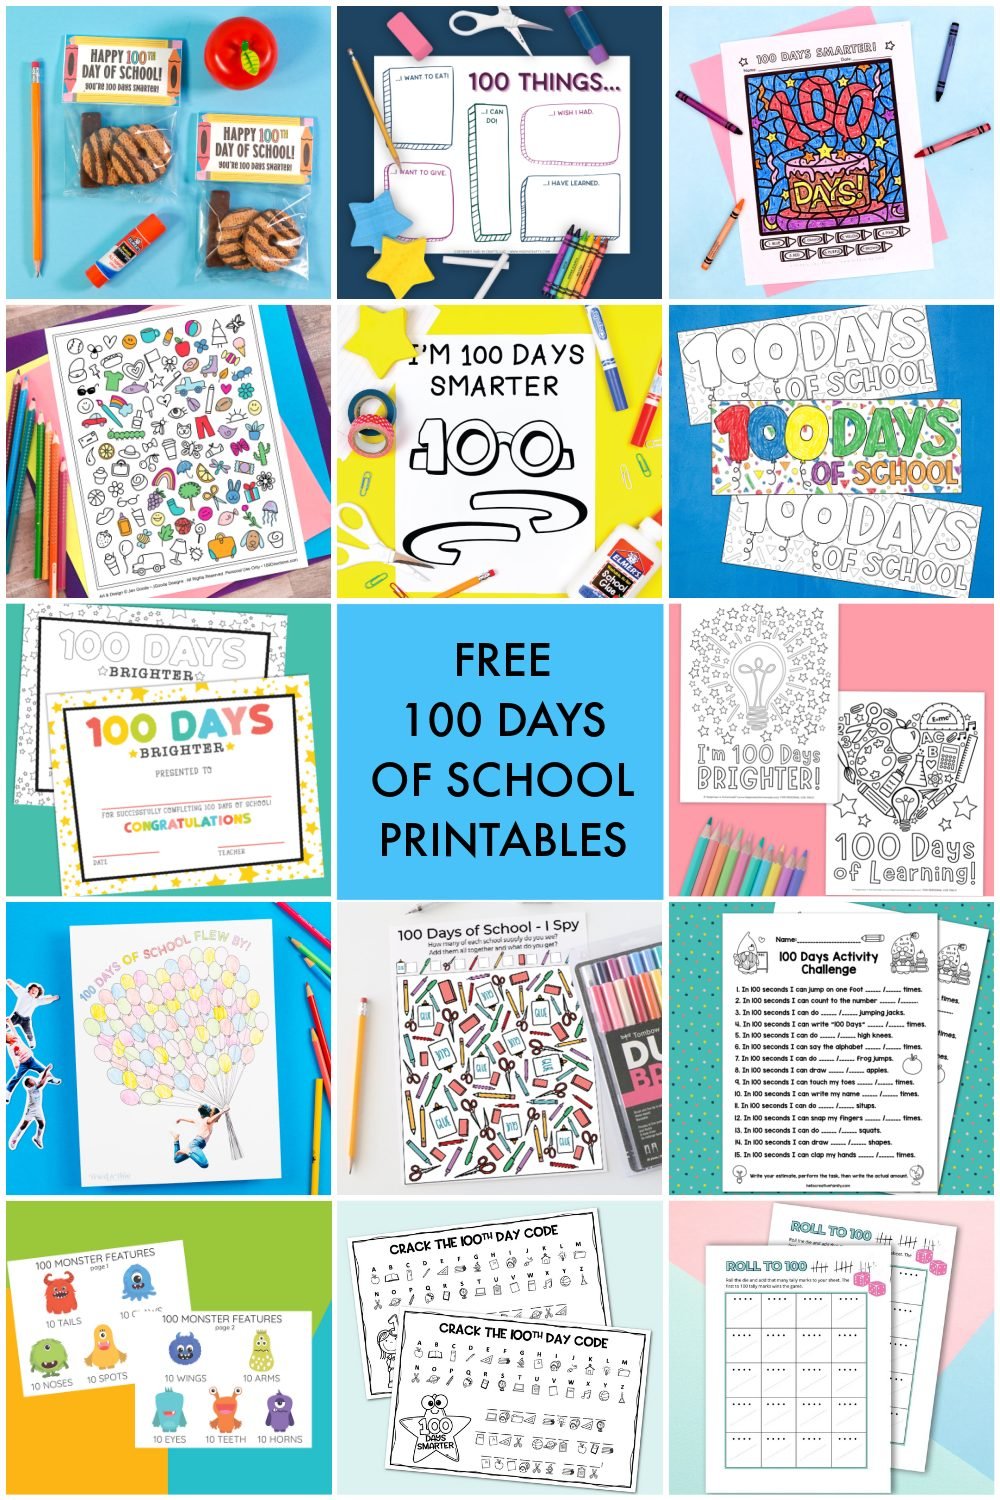 100 Days of School Printables Collage